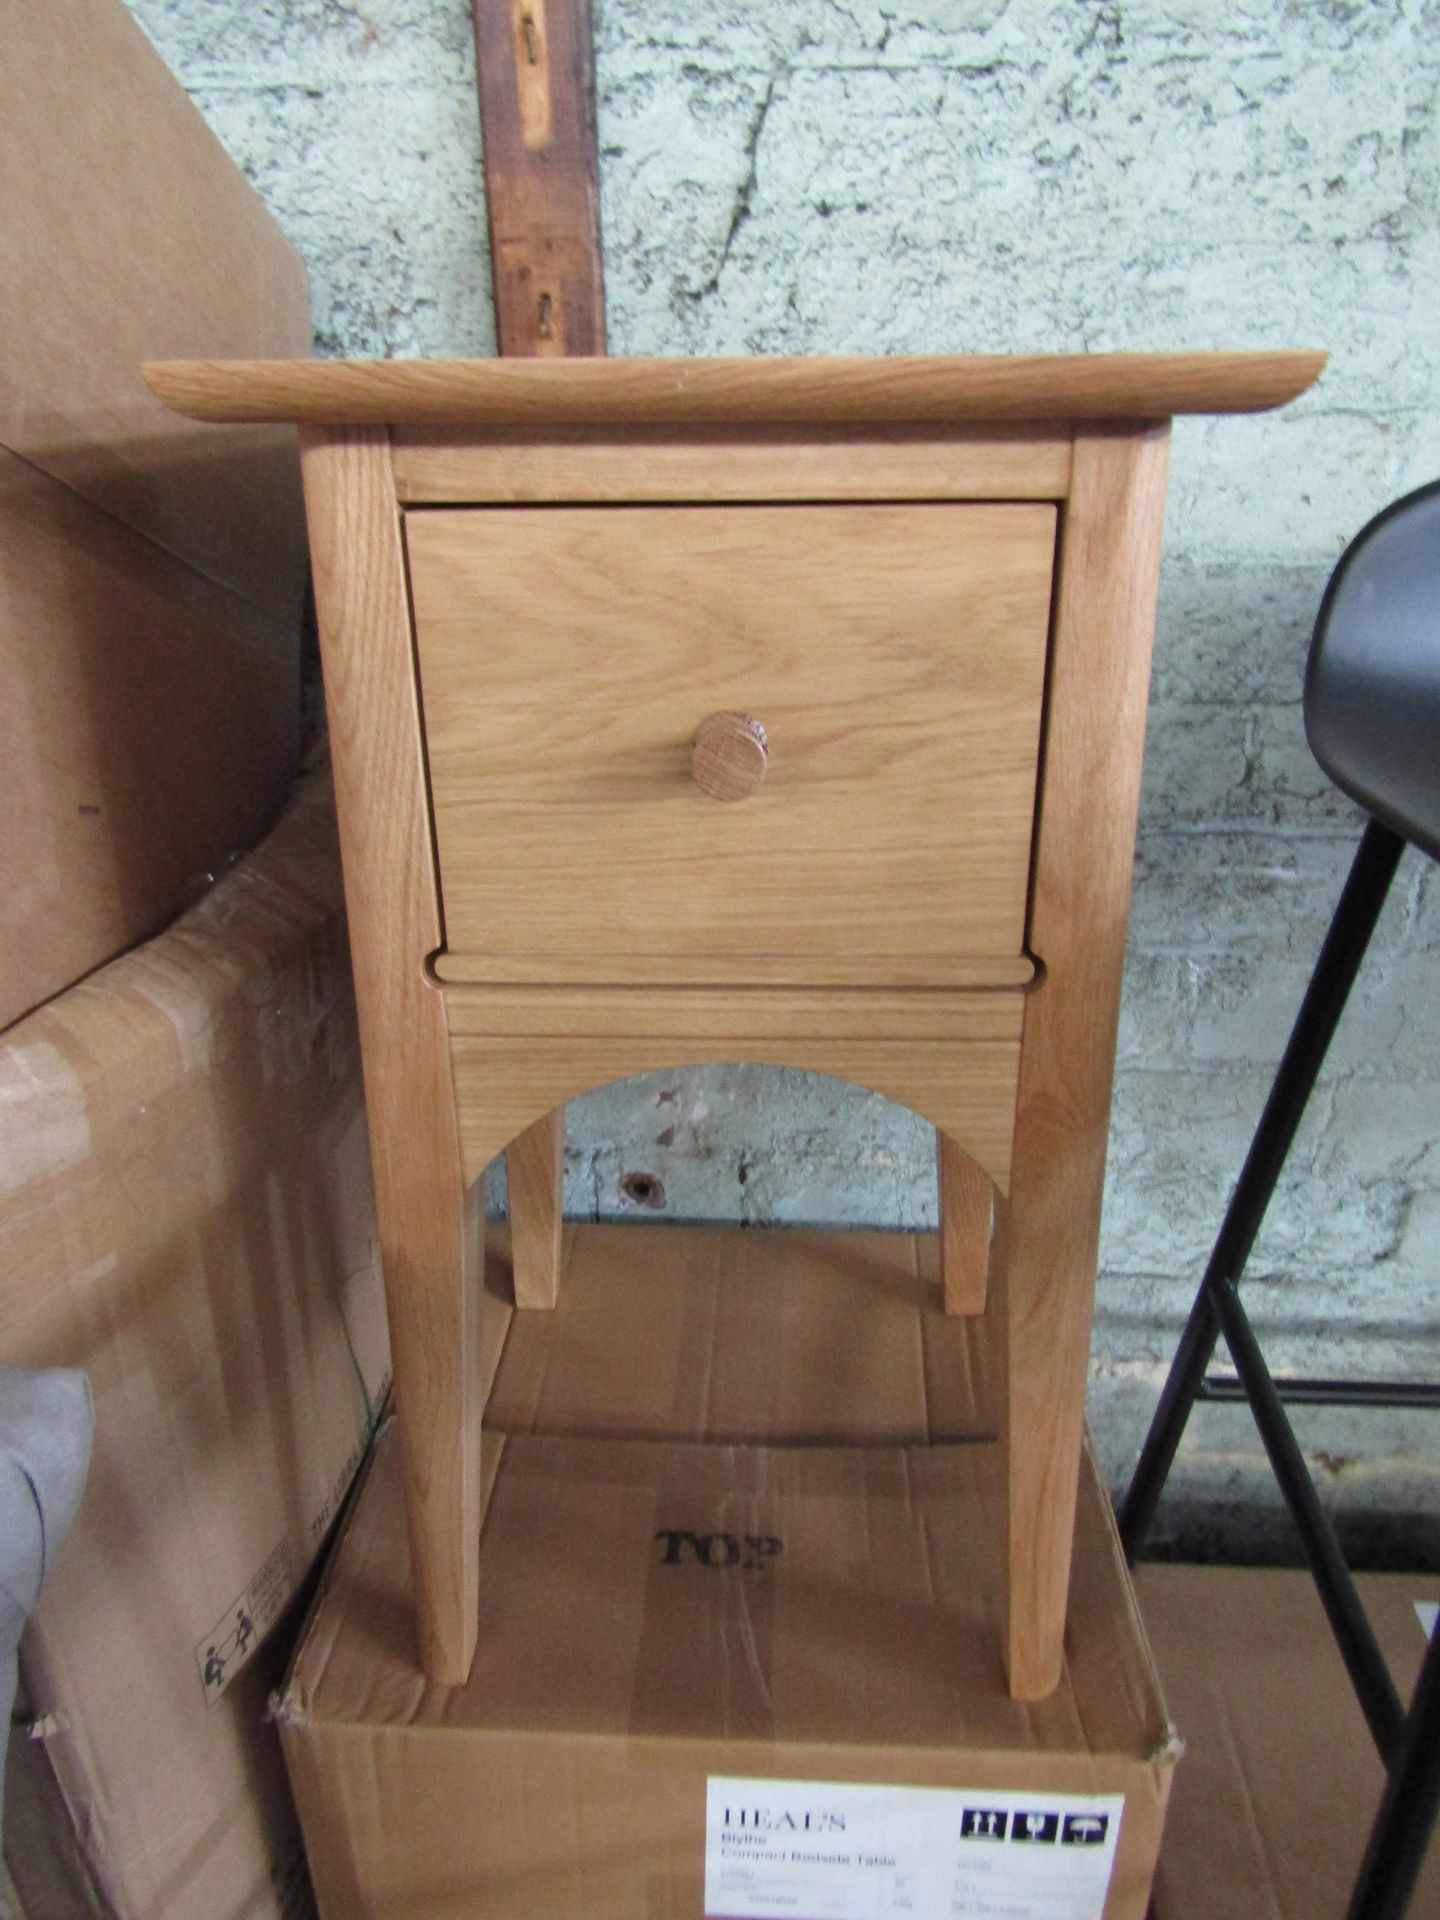 Heals Blythe Compact Bedside Table RRP Â£349.00 - This item looks to be in good condition and